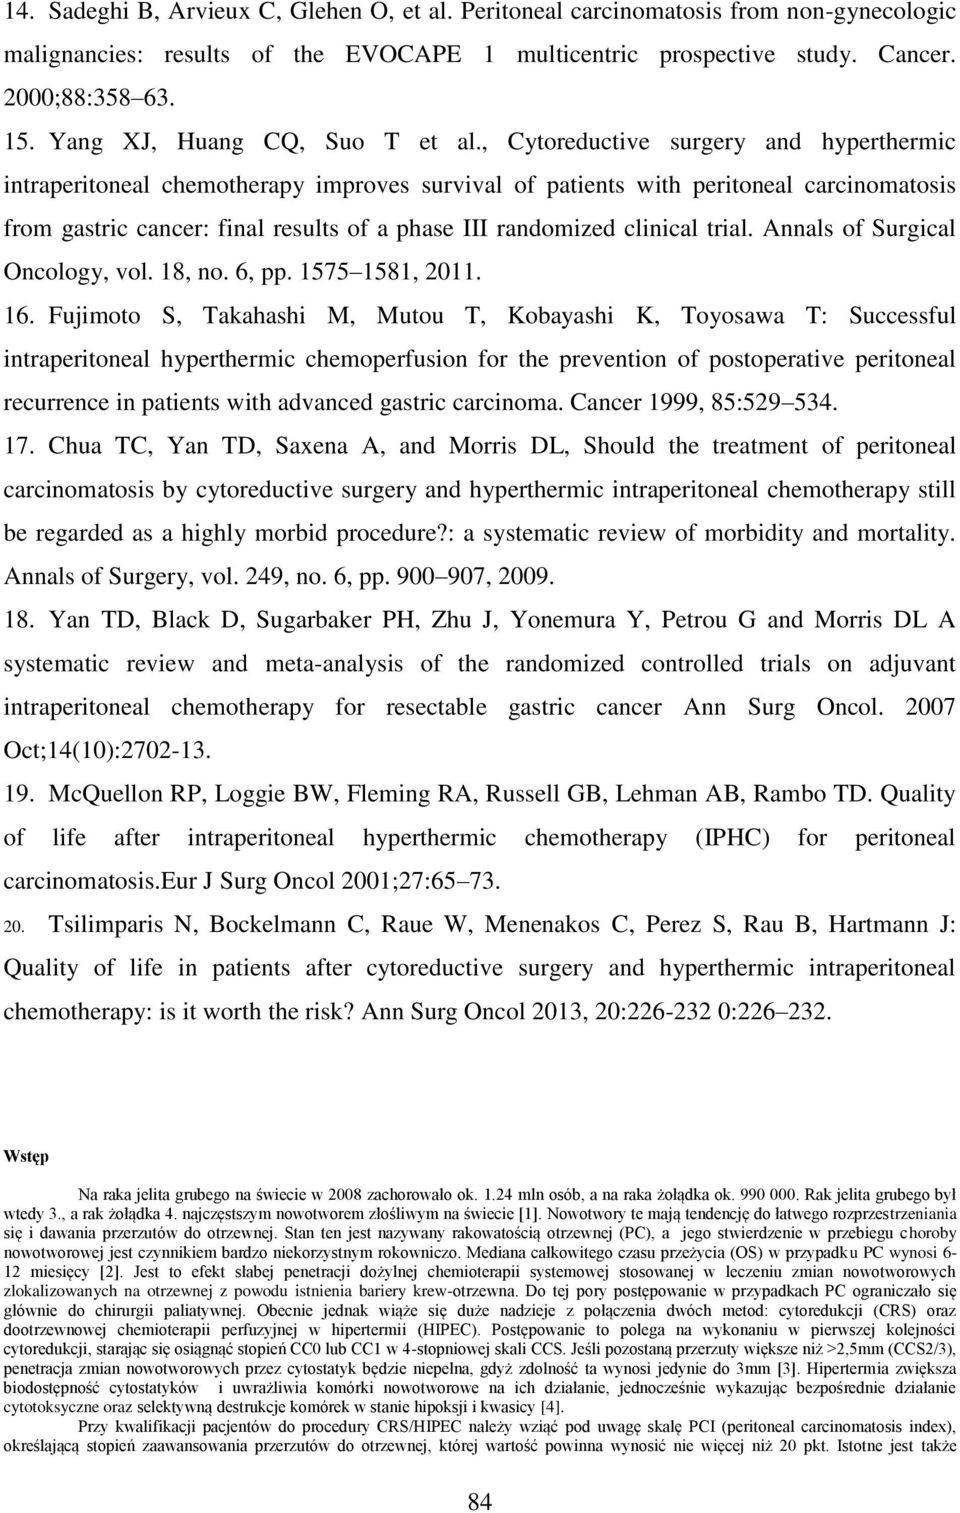 , Cytoreductive surgery and hyperthermic intraperitoneal chemotherapy improves survival of patients with peritoneal carcinomatosis from gastric cancer: final results of a phase III randomized